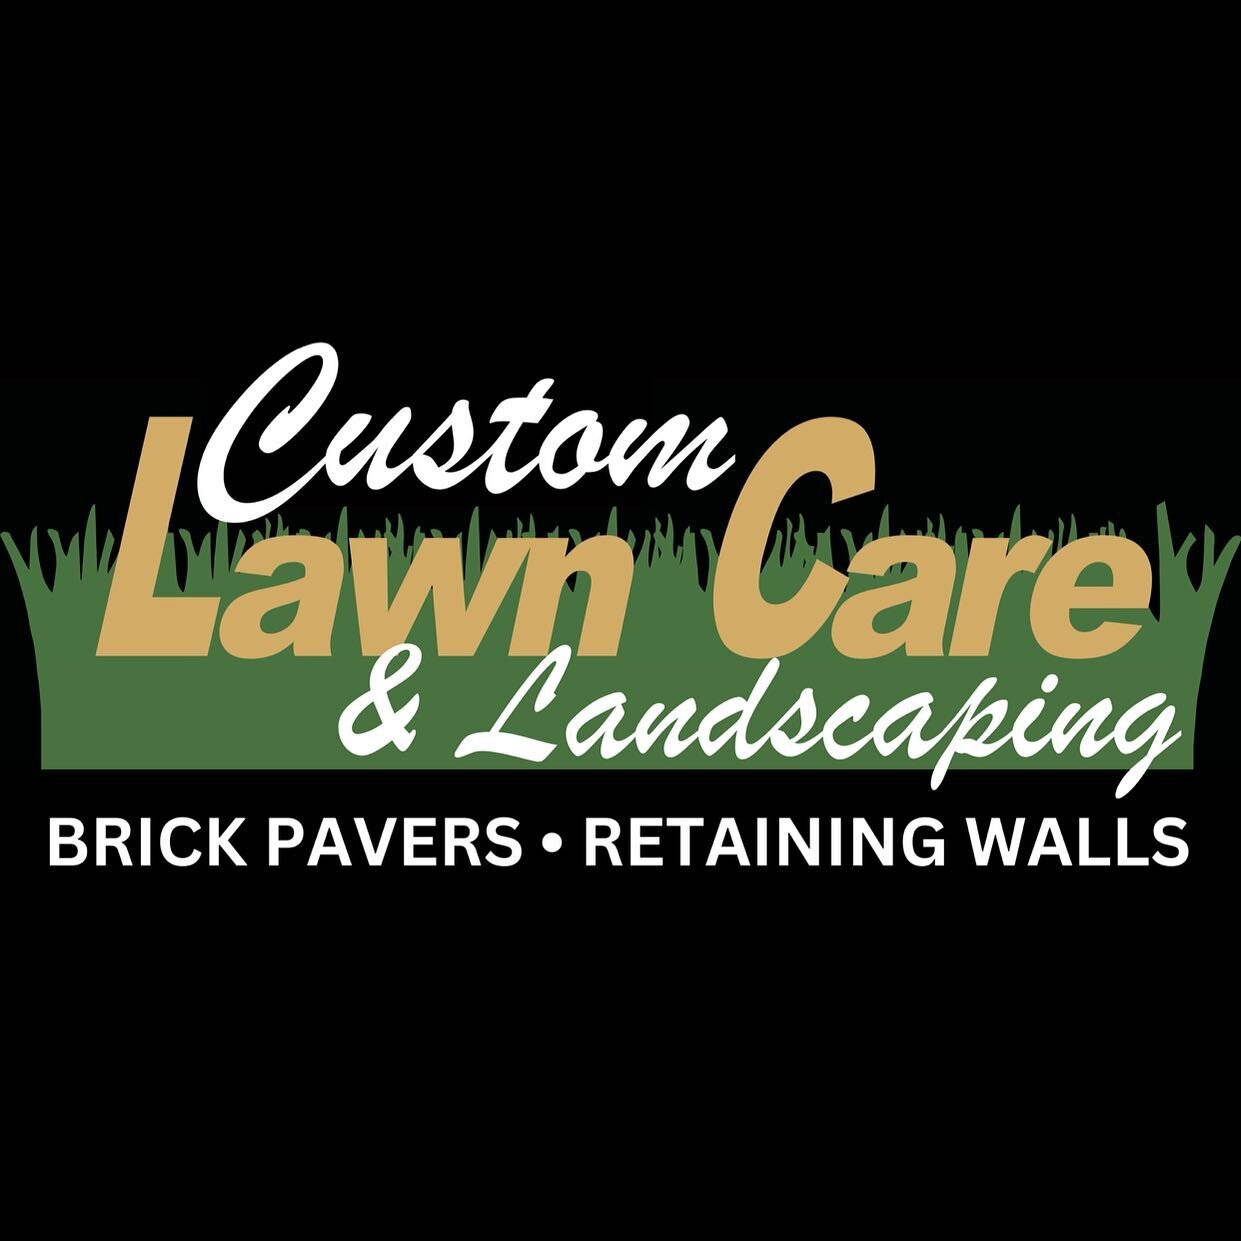 🌿 Transform your outdoor space this Spring with Custom Lawn Care &amp; Landscaping! 

🏡 Since 2004, we&rsquo;ve been your trusted, owner-operated experts in Weekly Lawn Maintenance, Landscaping, Light Excavating, Brick Pavers, Retaining Walls, and 